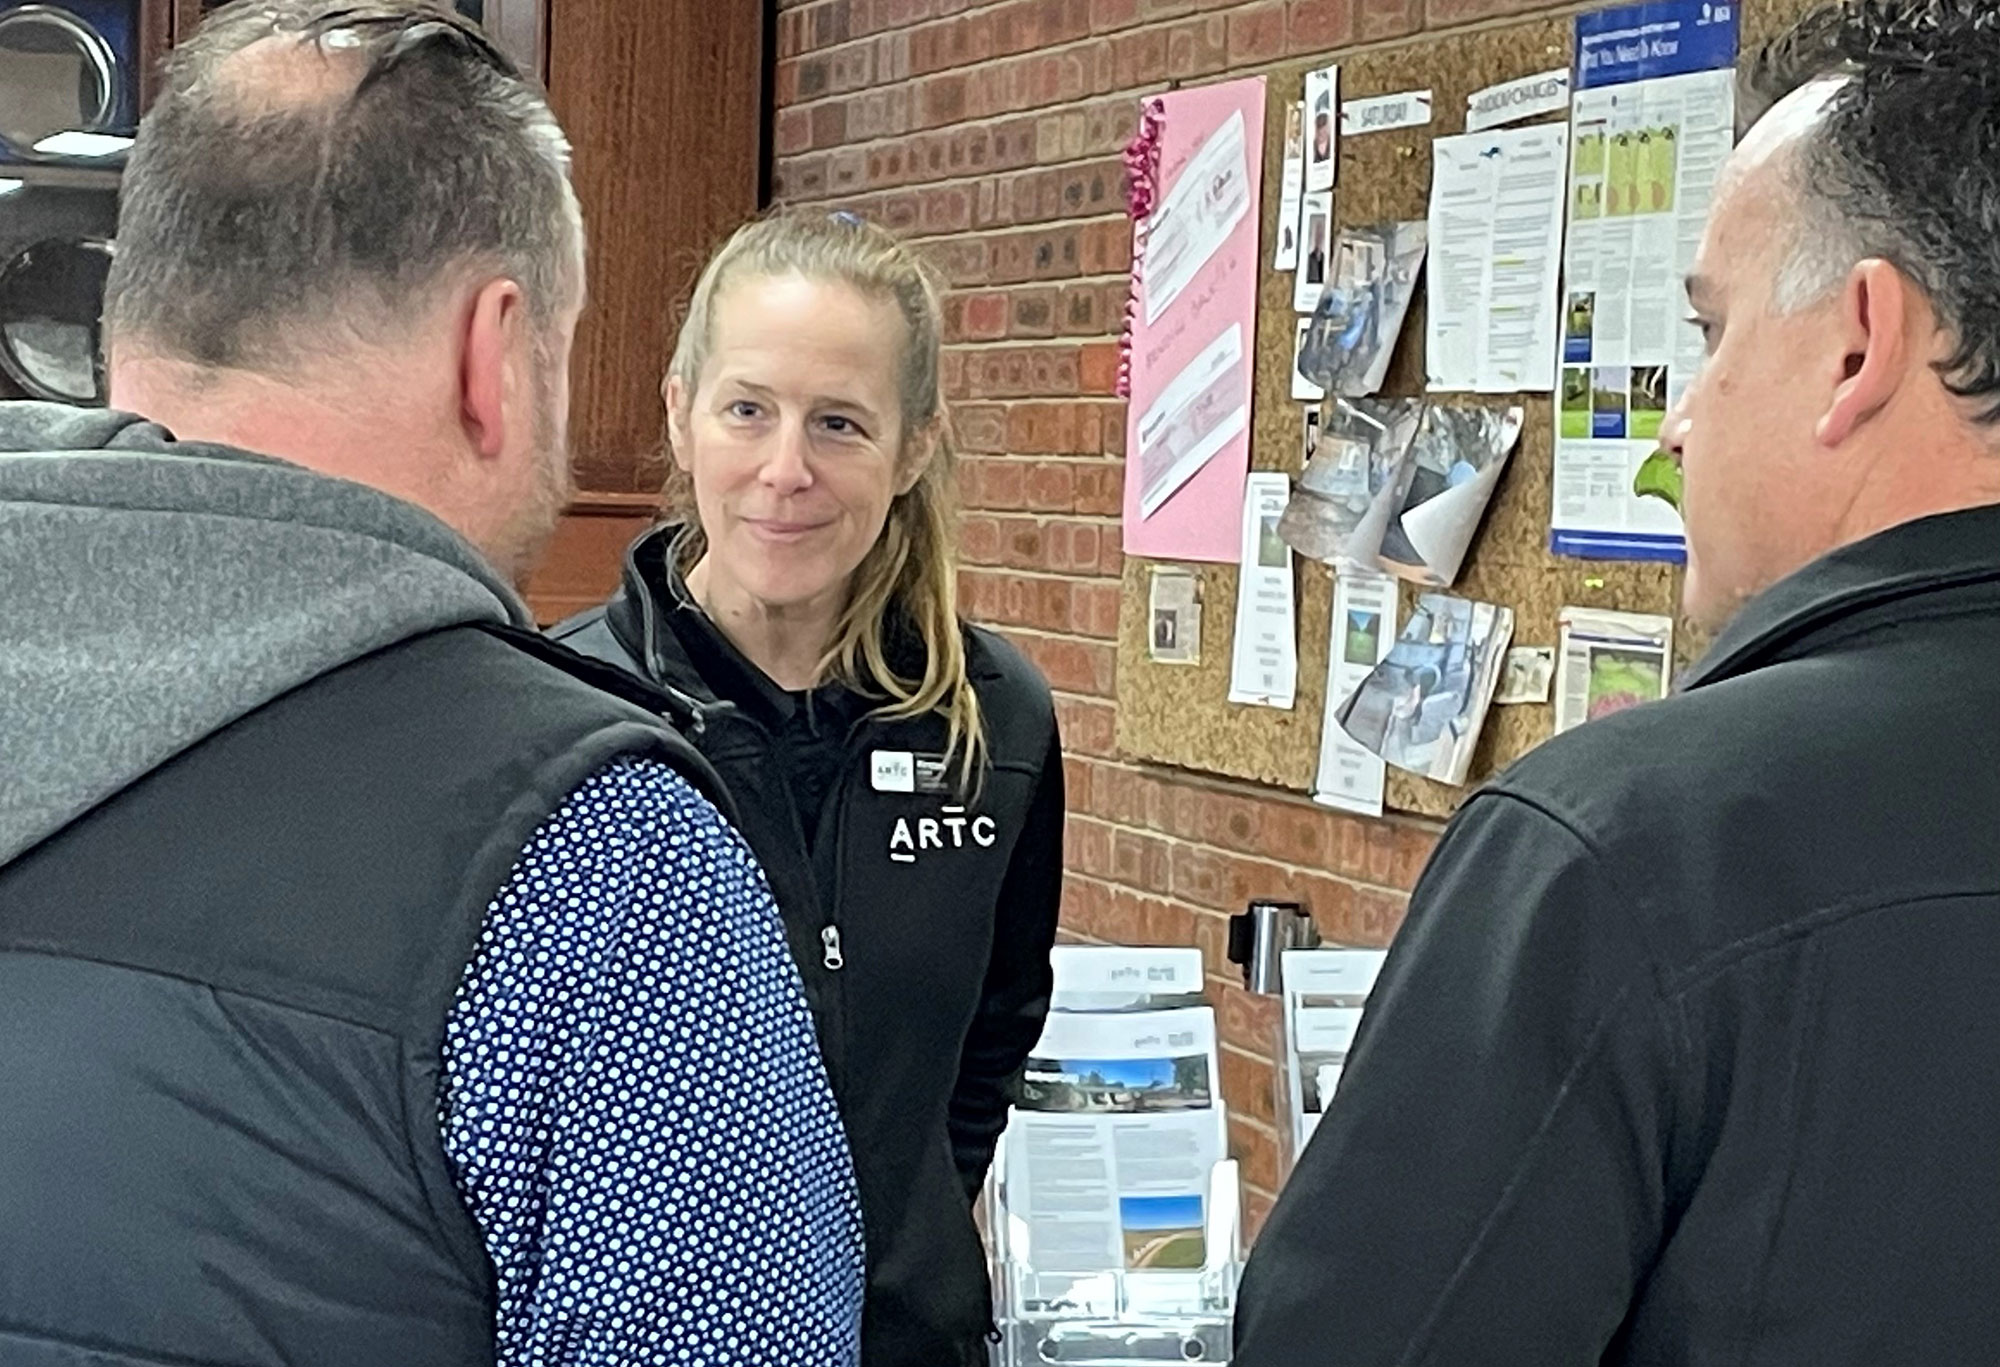 Inland Rail staff member, Kirsten, attending a stakeholder engagement event